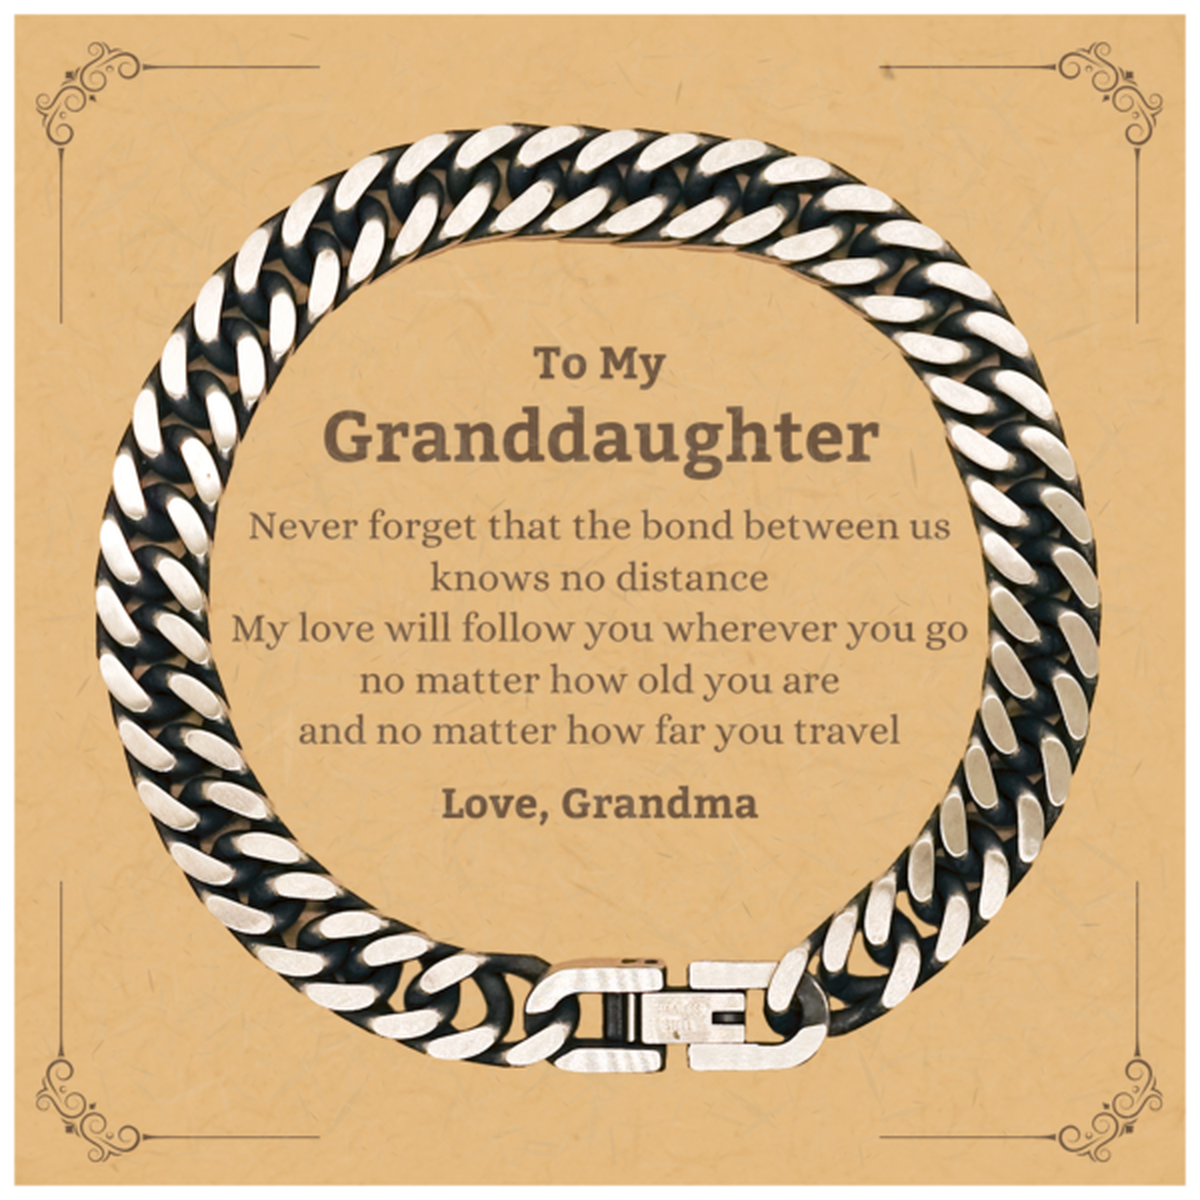 Granddaughter Birthday Gifts from Grandma, Adjustable Cuban Link Chain Bracelet for Granddaughter Christmas Graduation Unique Gifts Granddaughter Never forget that the bond between us knows no distance. Love, Grandma